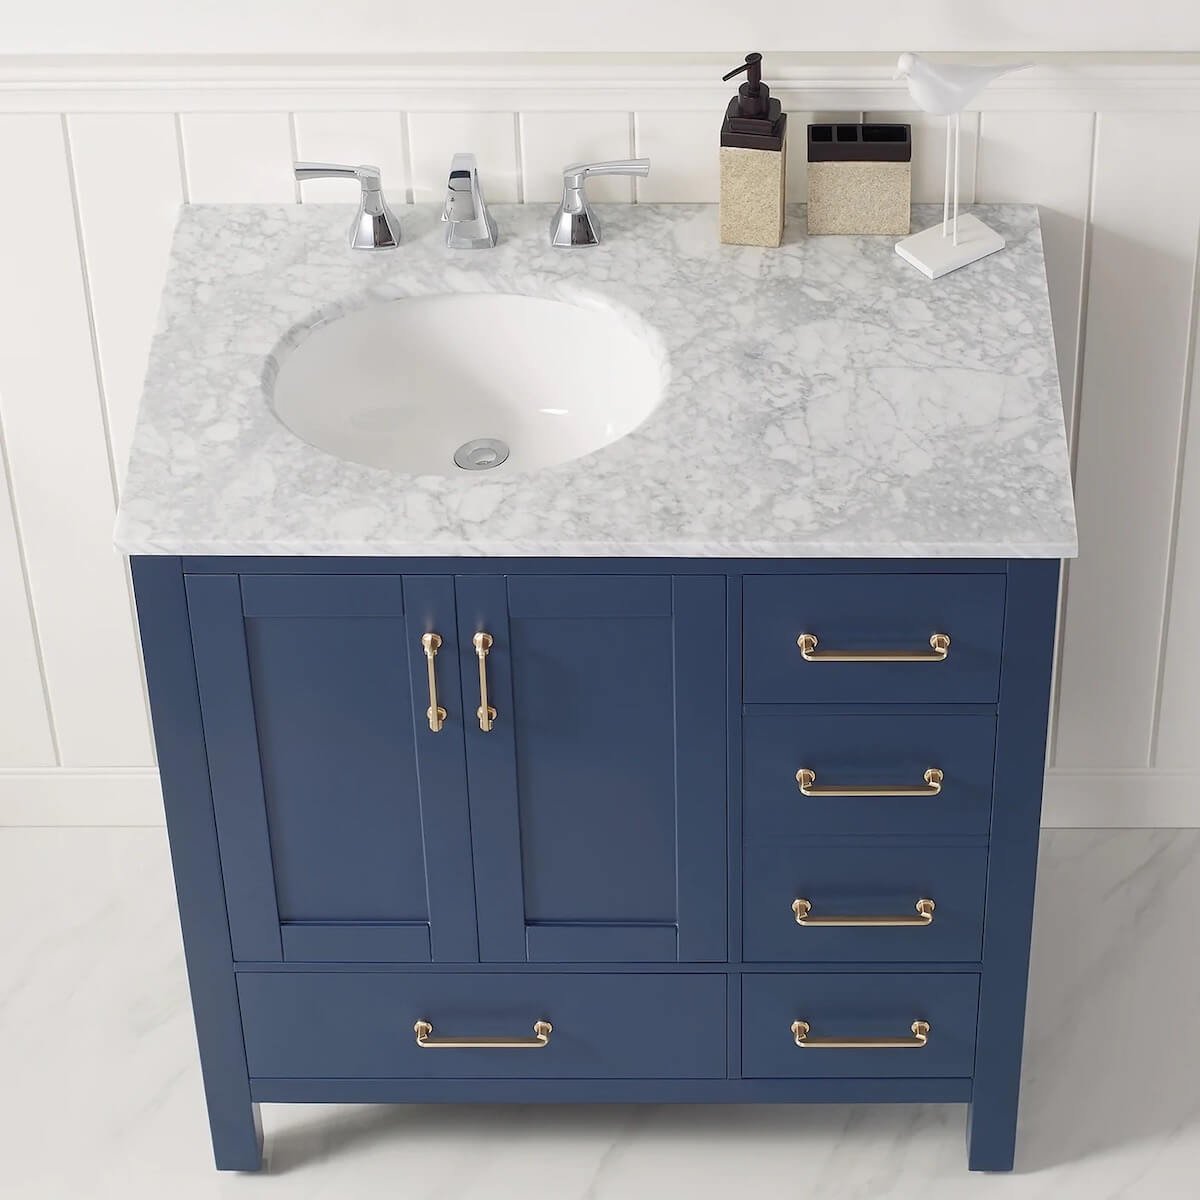 Vinnova 36 Inch Gela Royal Blue Freestanding Single Vanity with Carrara White Marble Countertop Without Mirror Counter 723036-RB-CA-NM